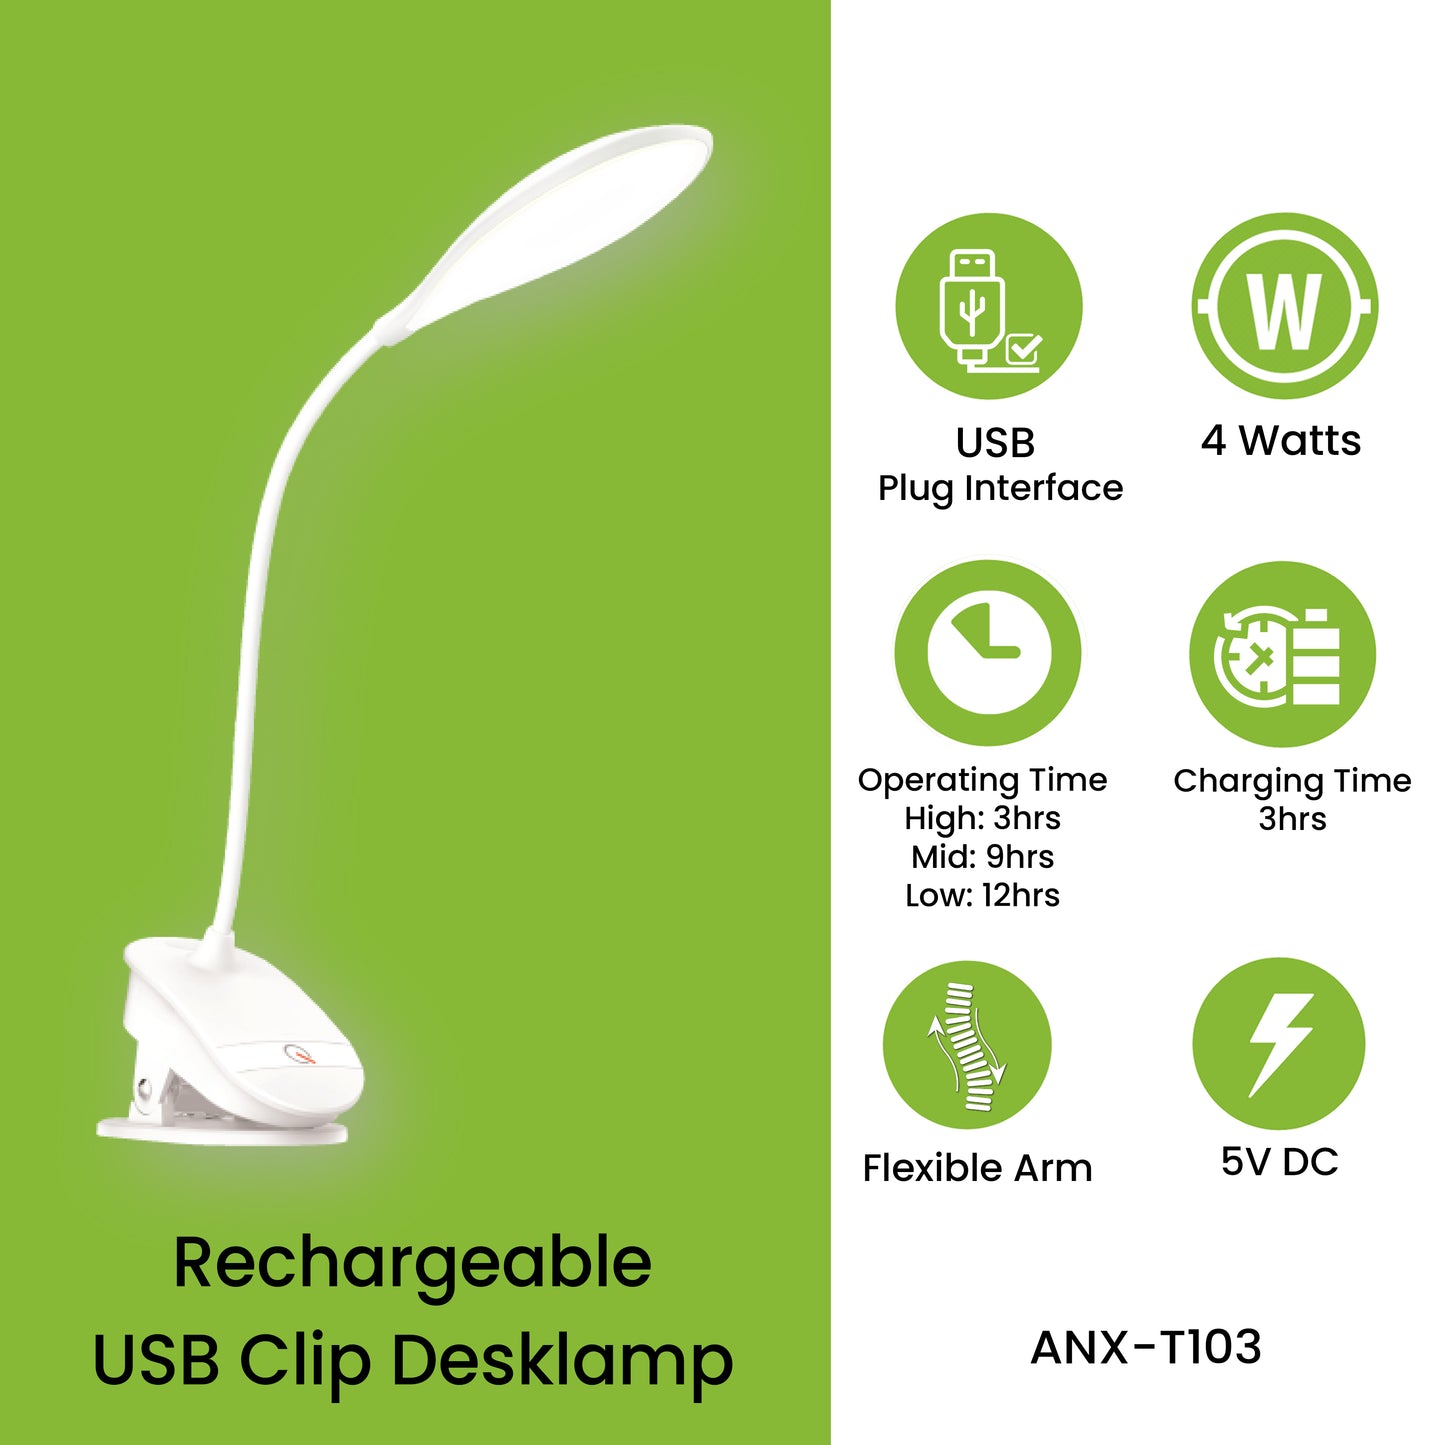 Nxled 4W Rechargeable USB Clip Desklamp Daylight (ANX-T103)